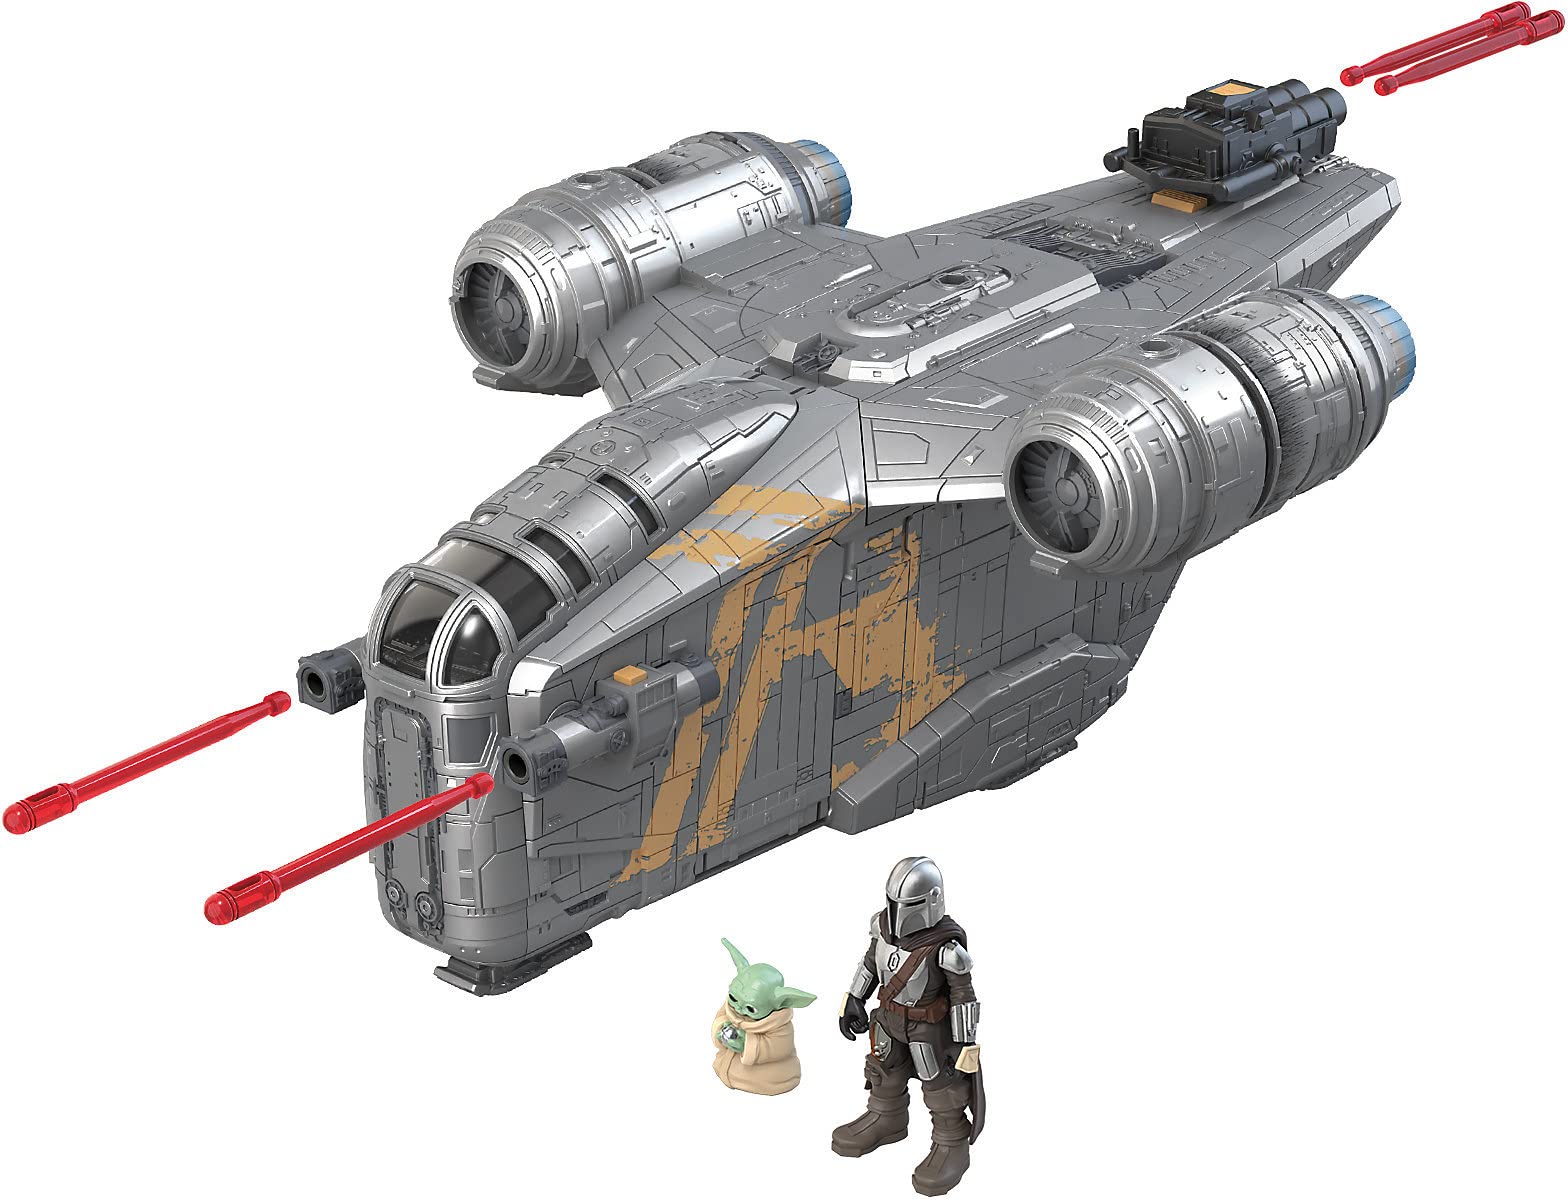 STAR WARS Hasbro Mission Fleet The Mandalorian The Child Razor Crest Outer Rim Run Deluxe Vehicle with 2.5-Inch-Scale Figure,for Kids Ages 4 and Up